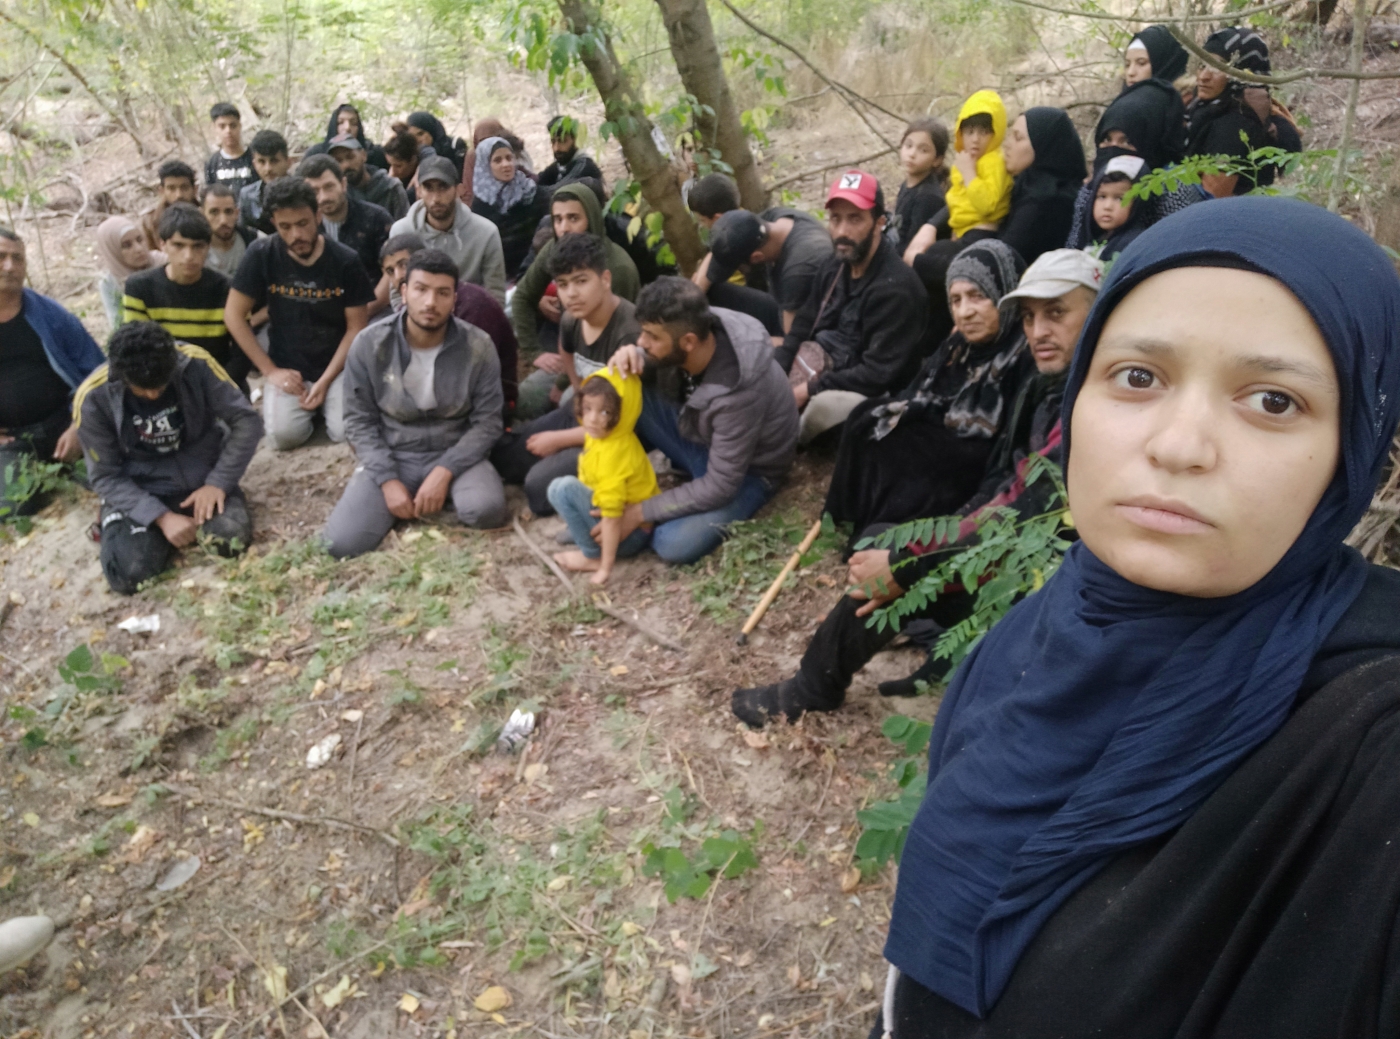 The group of Syrian asylum seekers stranded on the Greek Evros river (Twitter/@g_christides)